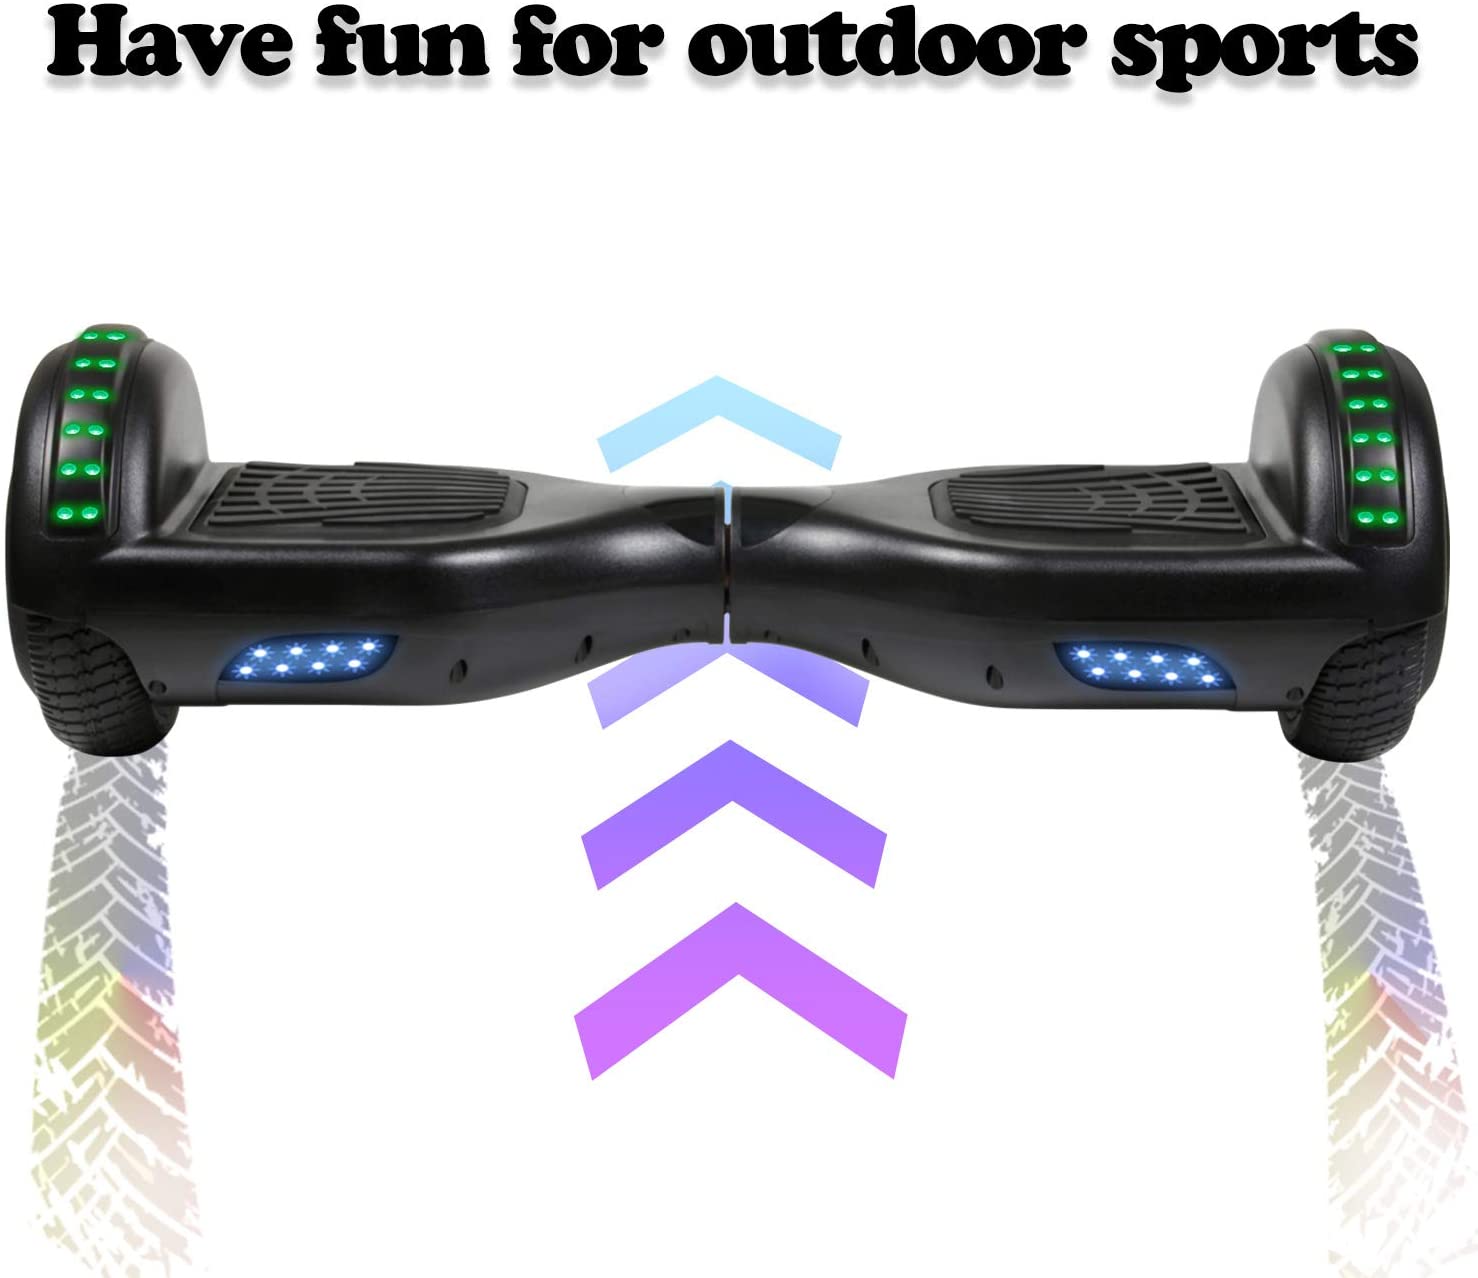 11 Best Hoverboard For Kids (2022 Reviews & Buying Guide) 6